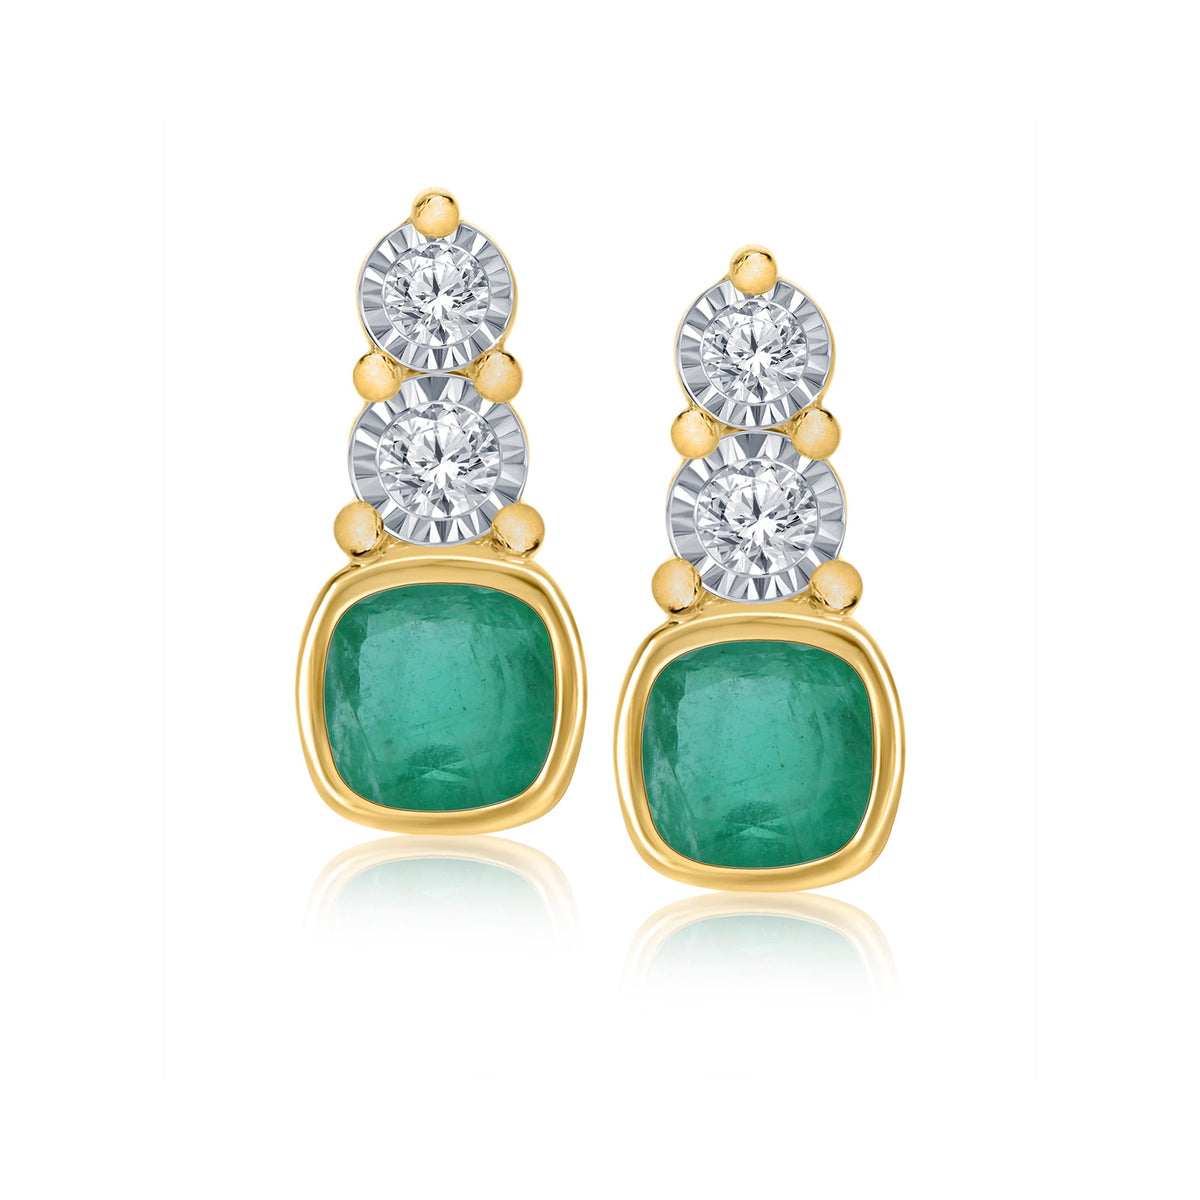 9ct gold 4mm cushion shape emerald &amp; miracle plate diamond studs earrings 0.06ct